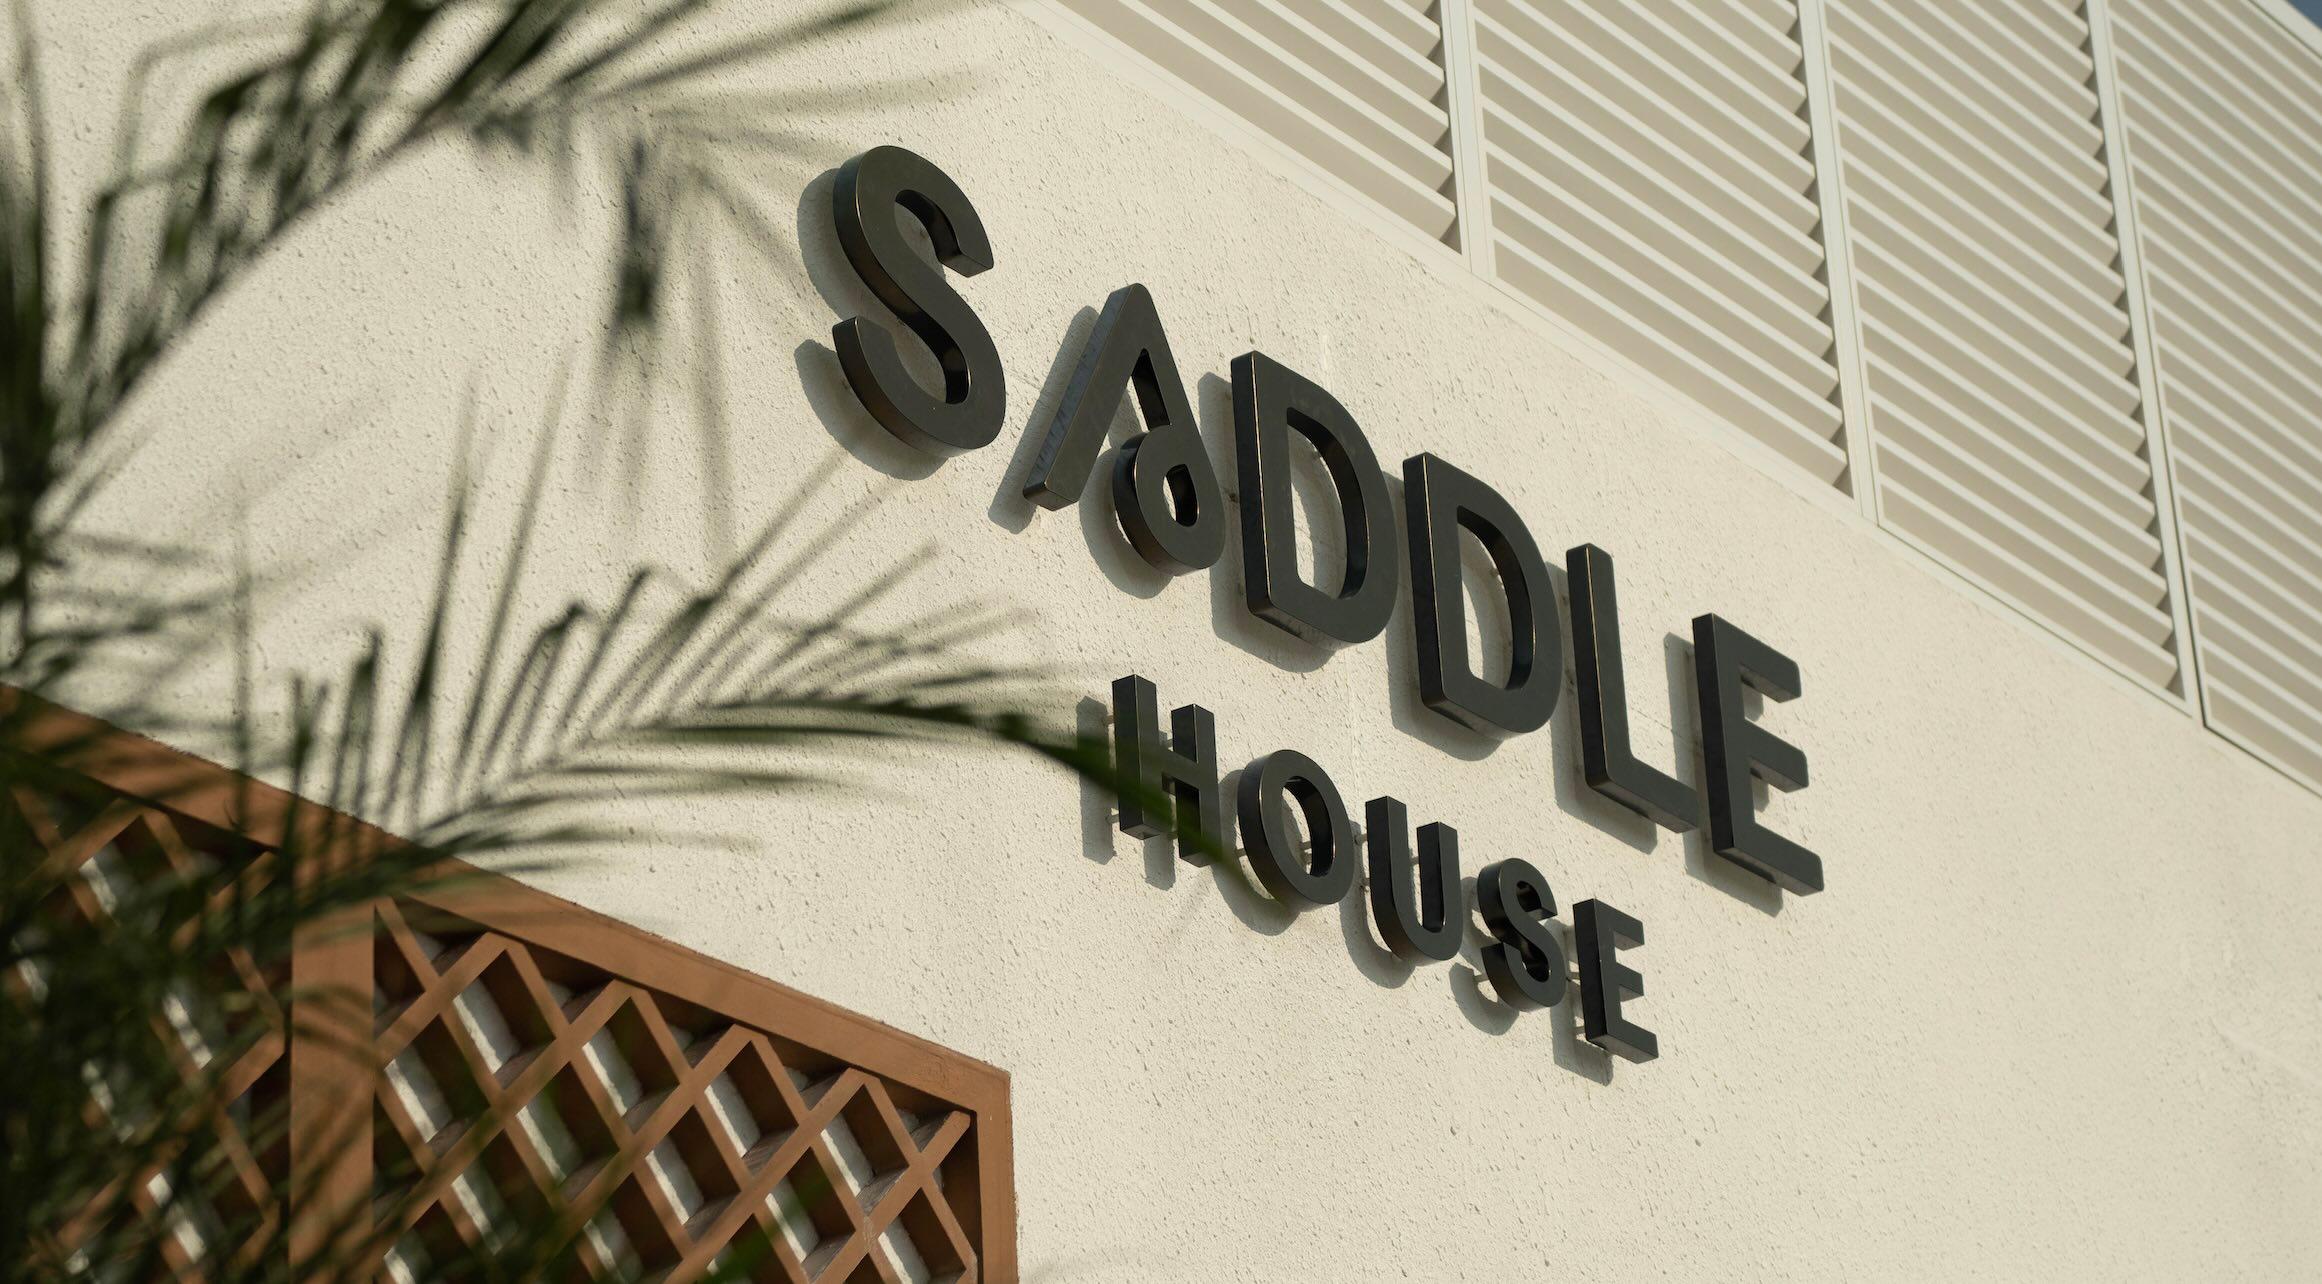 MAC Cosmetics X Saddle House pop-up showcases new collection